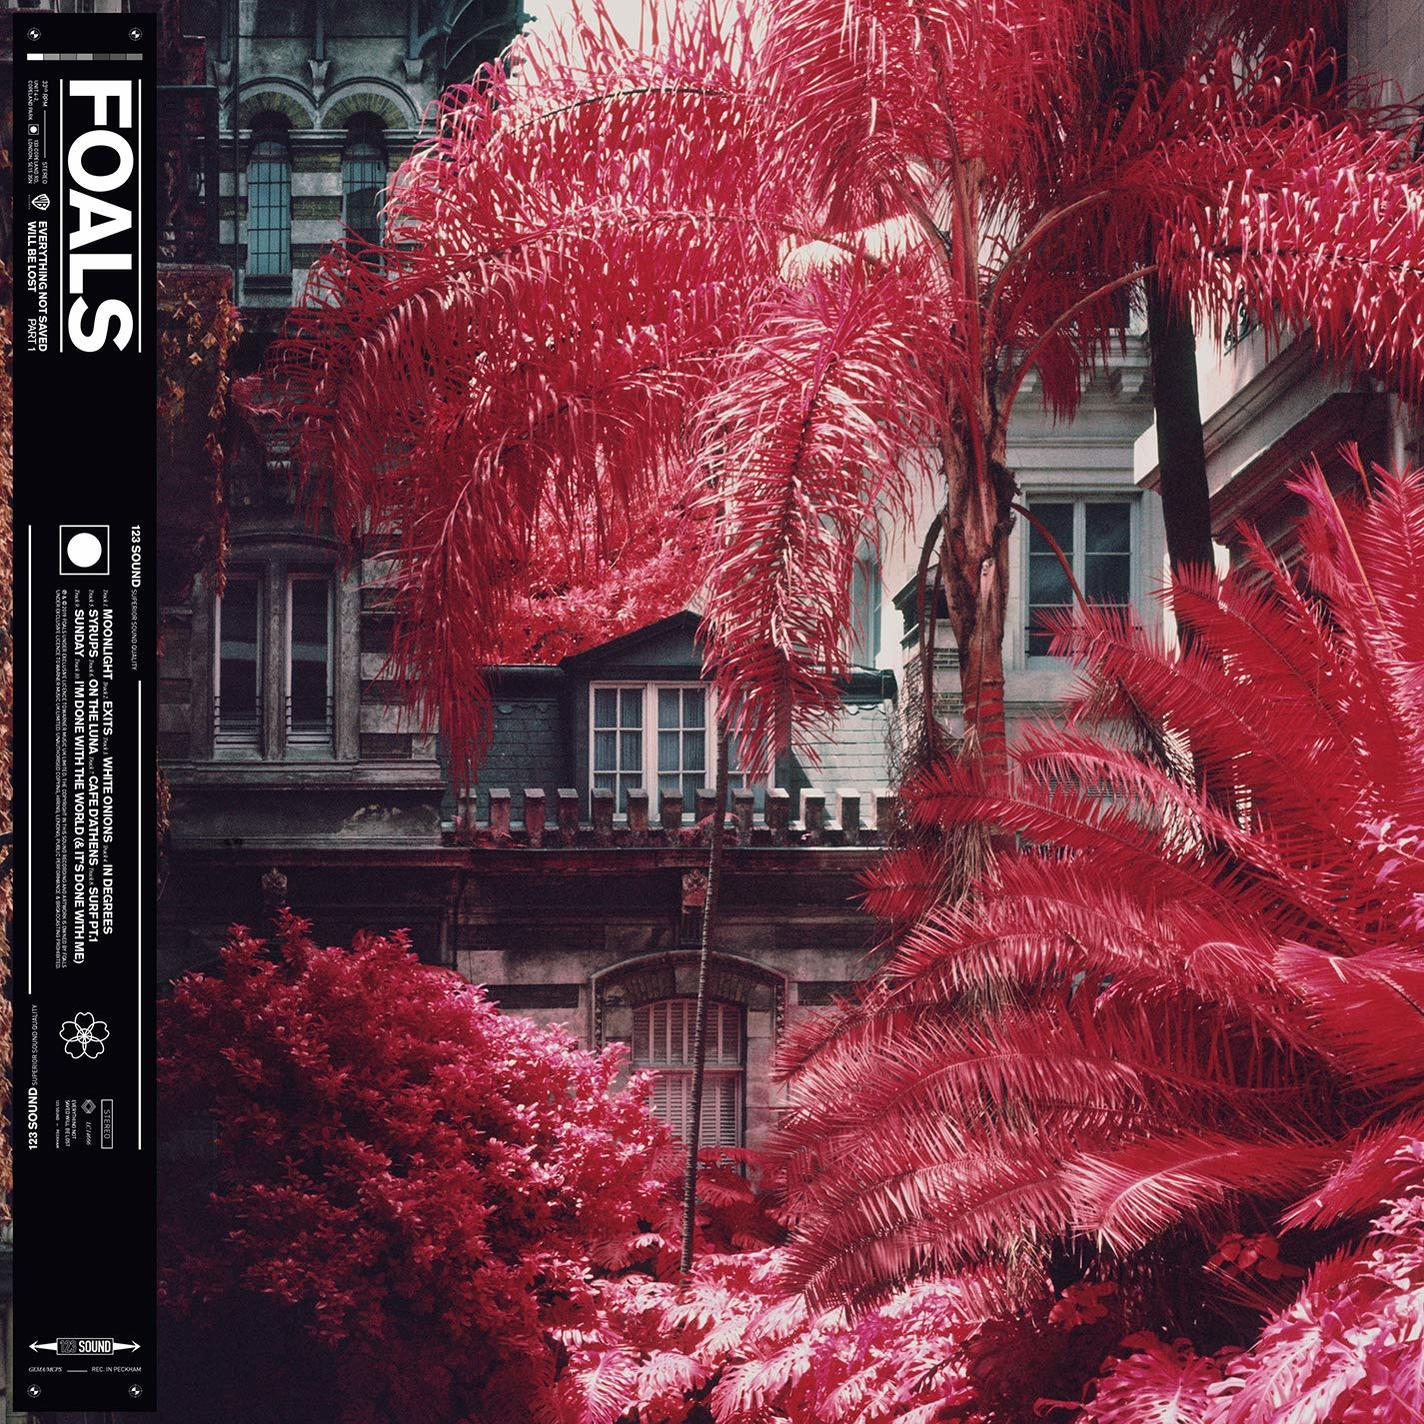 Foals - Everything Saved Will Lost - Pt.1 Be (Vinyl) Not